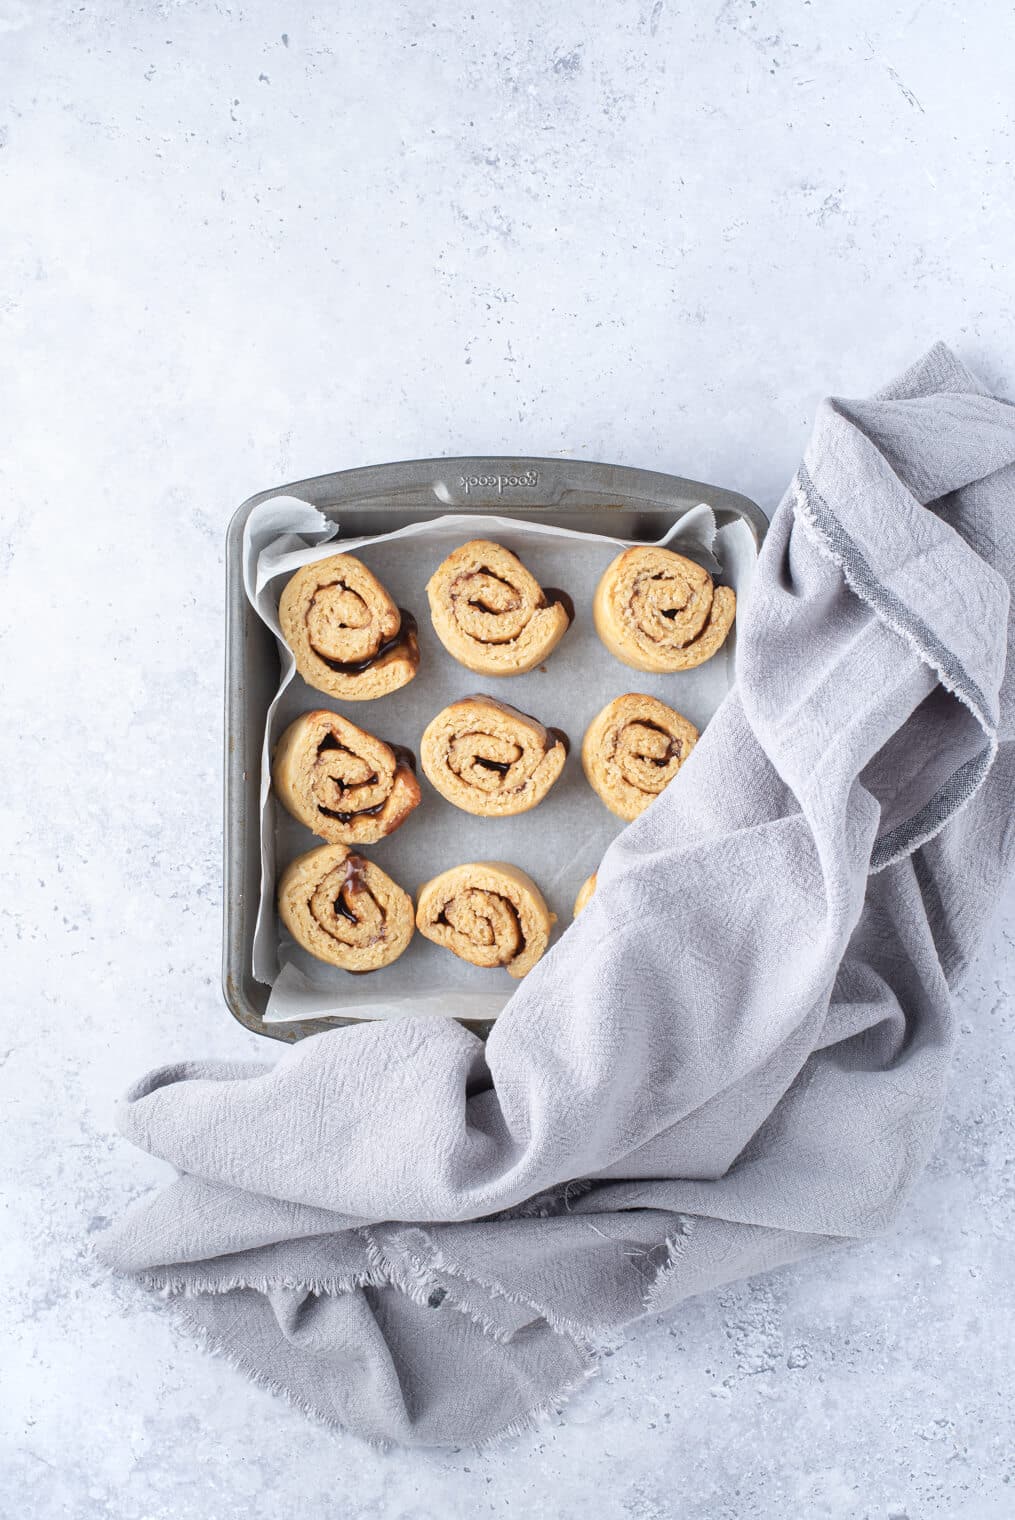 a pan of keto cinnamon rolls with a kitchen towel over them before rising to go into the oven